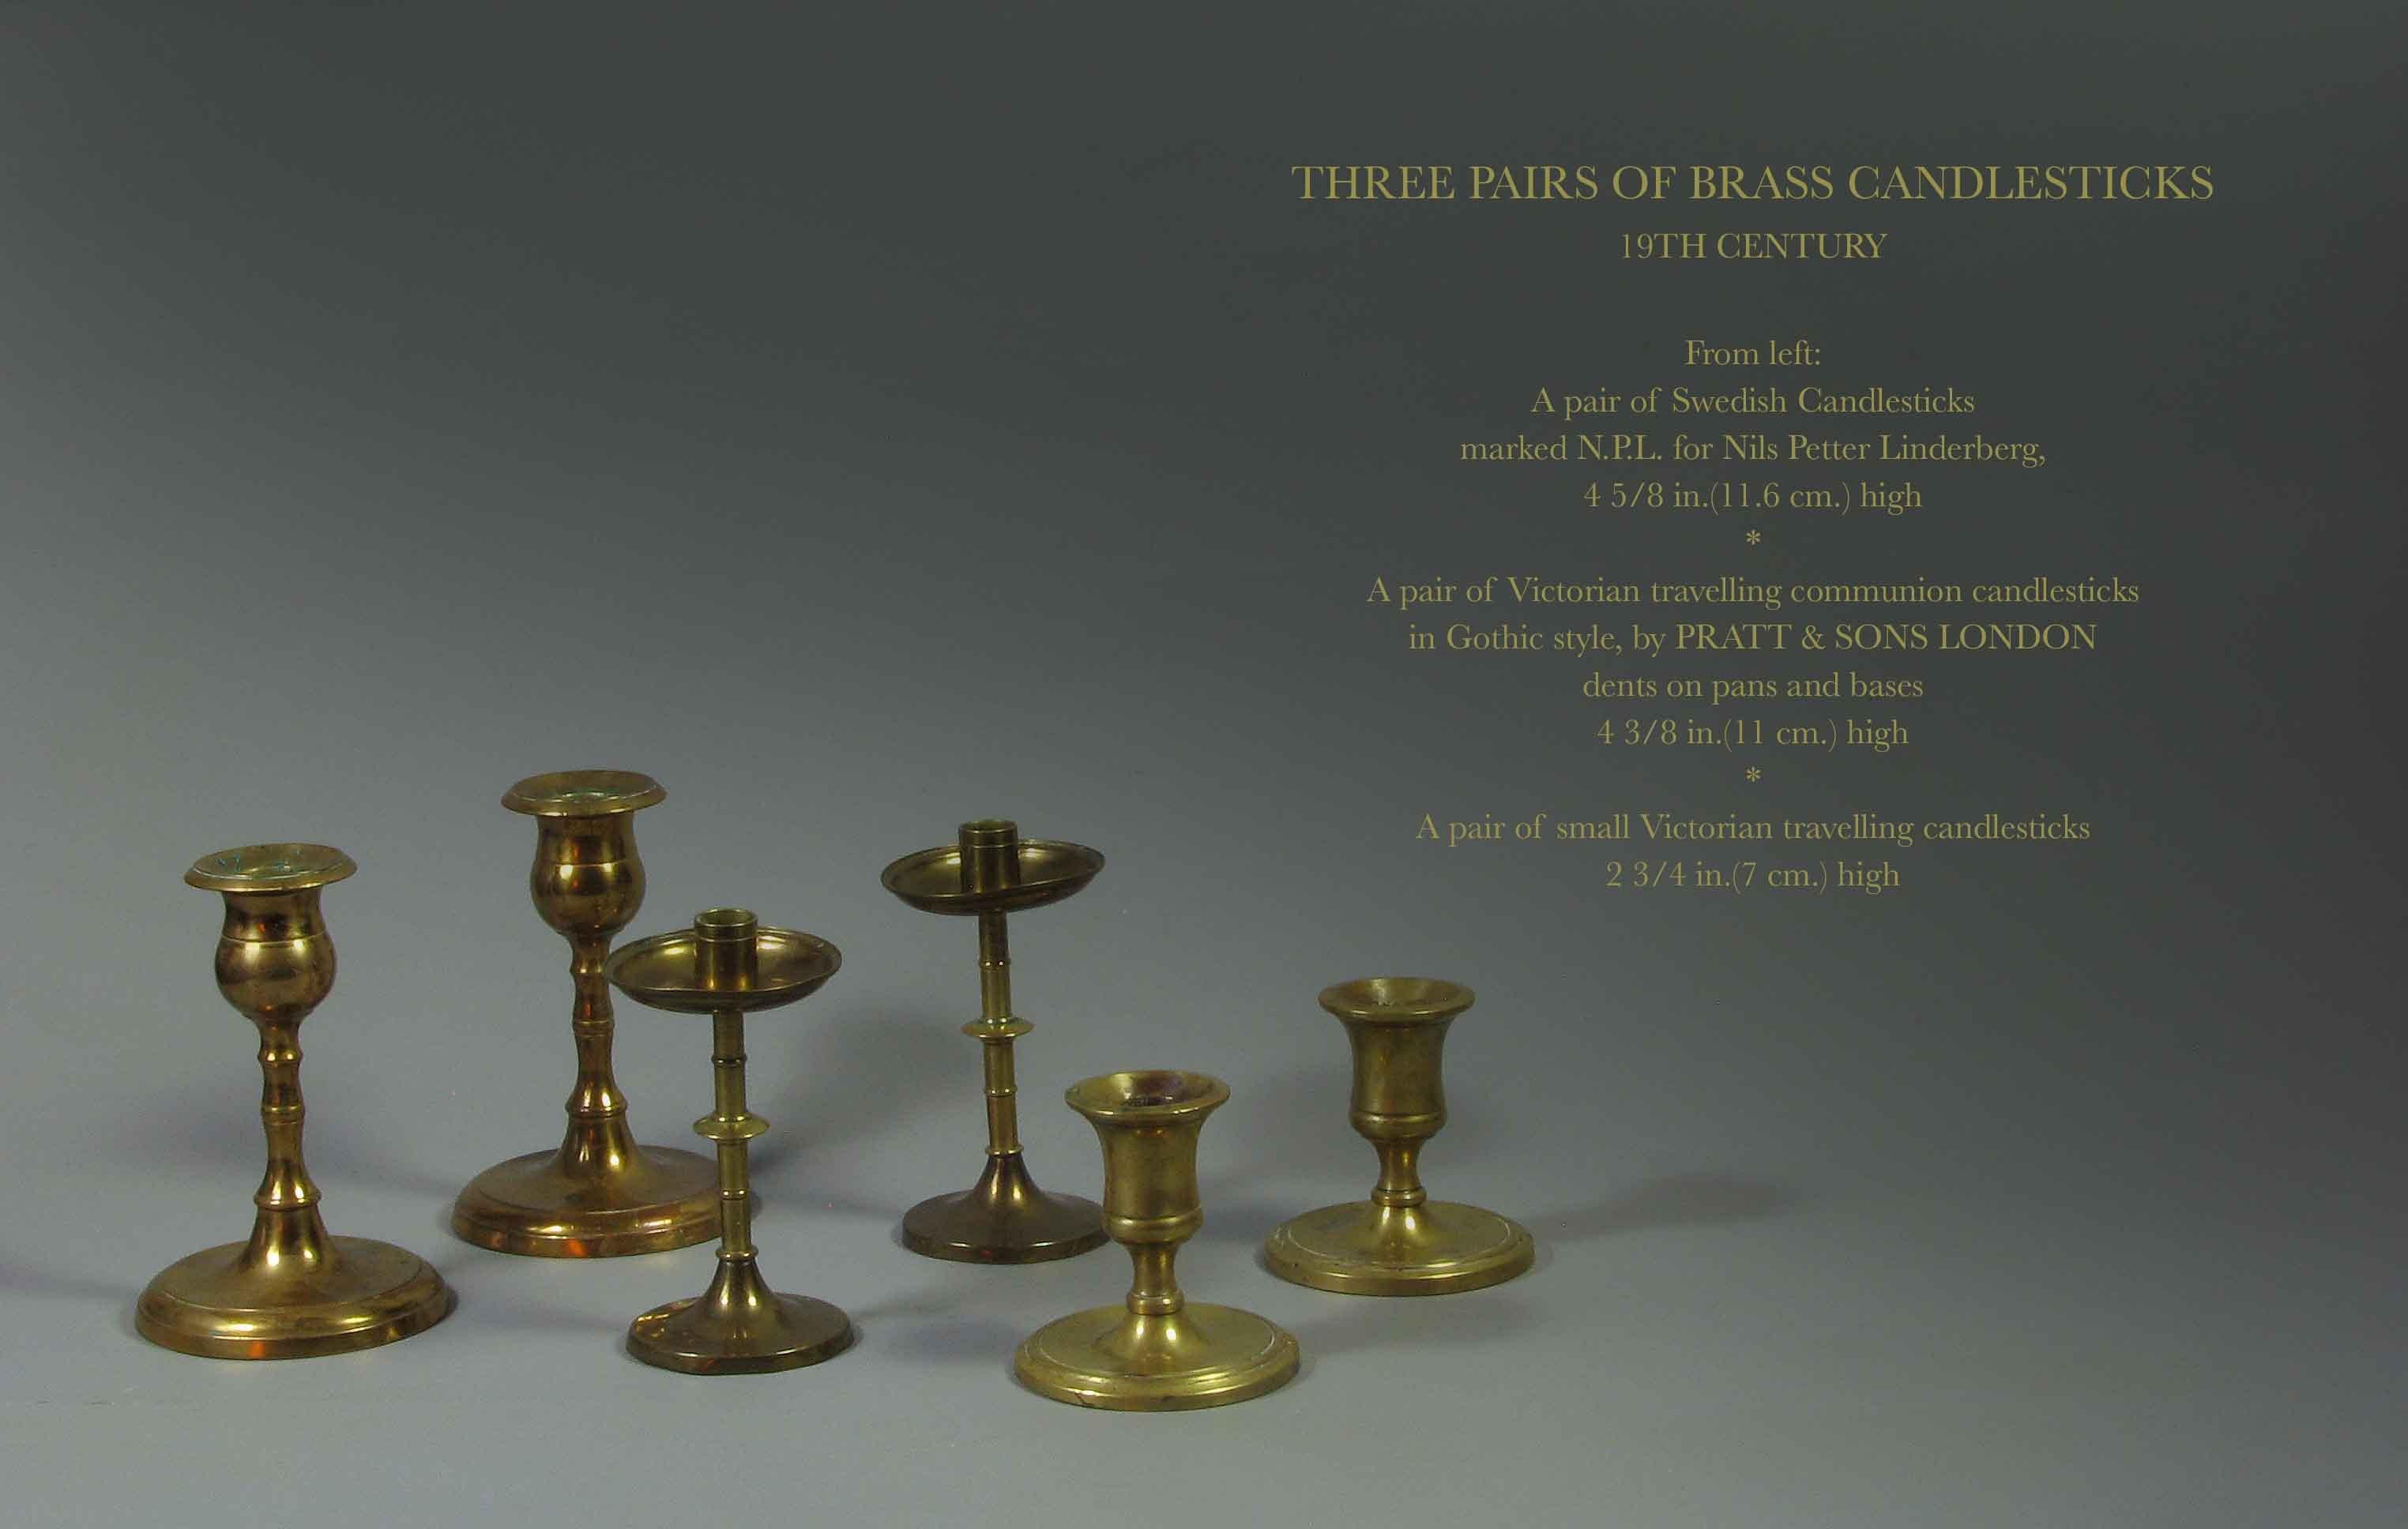 Three pairs of brass candlesticks
19th century
From left:
A pair of Swedish candlesticks
marked N.P.L. for Nils Petter Linderberg,
4 5/8 in.(11.6 cm.) high
*
A pair of Victorian travelling communion candlesticks
in Gothic style, by PRATT &